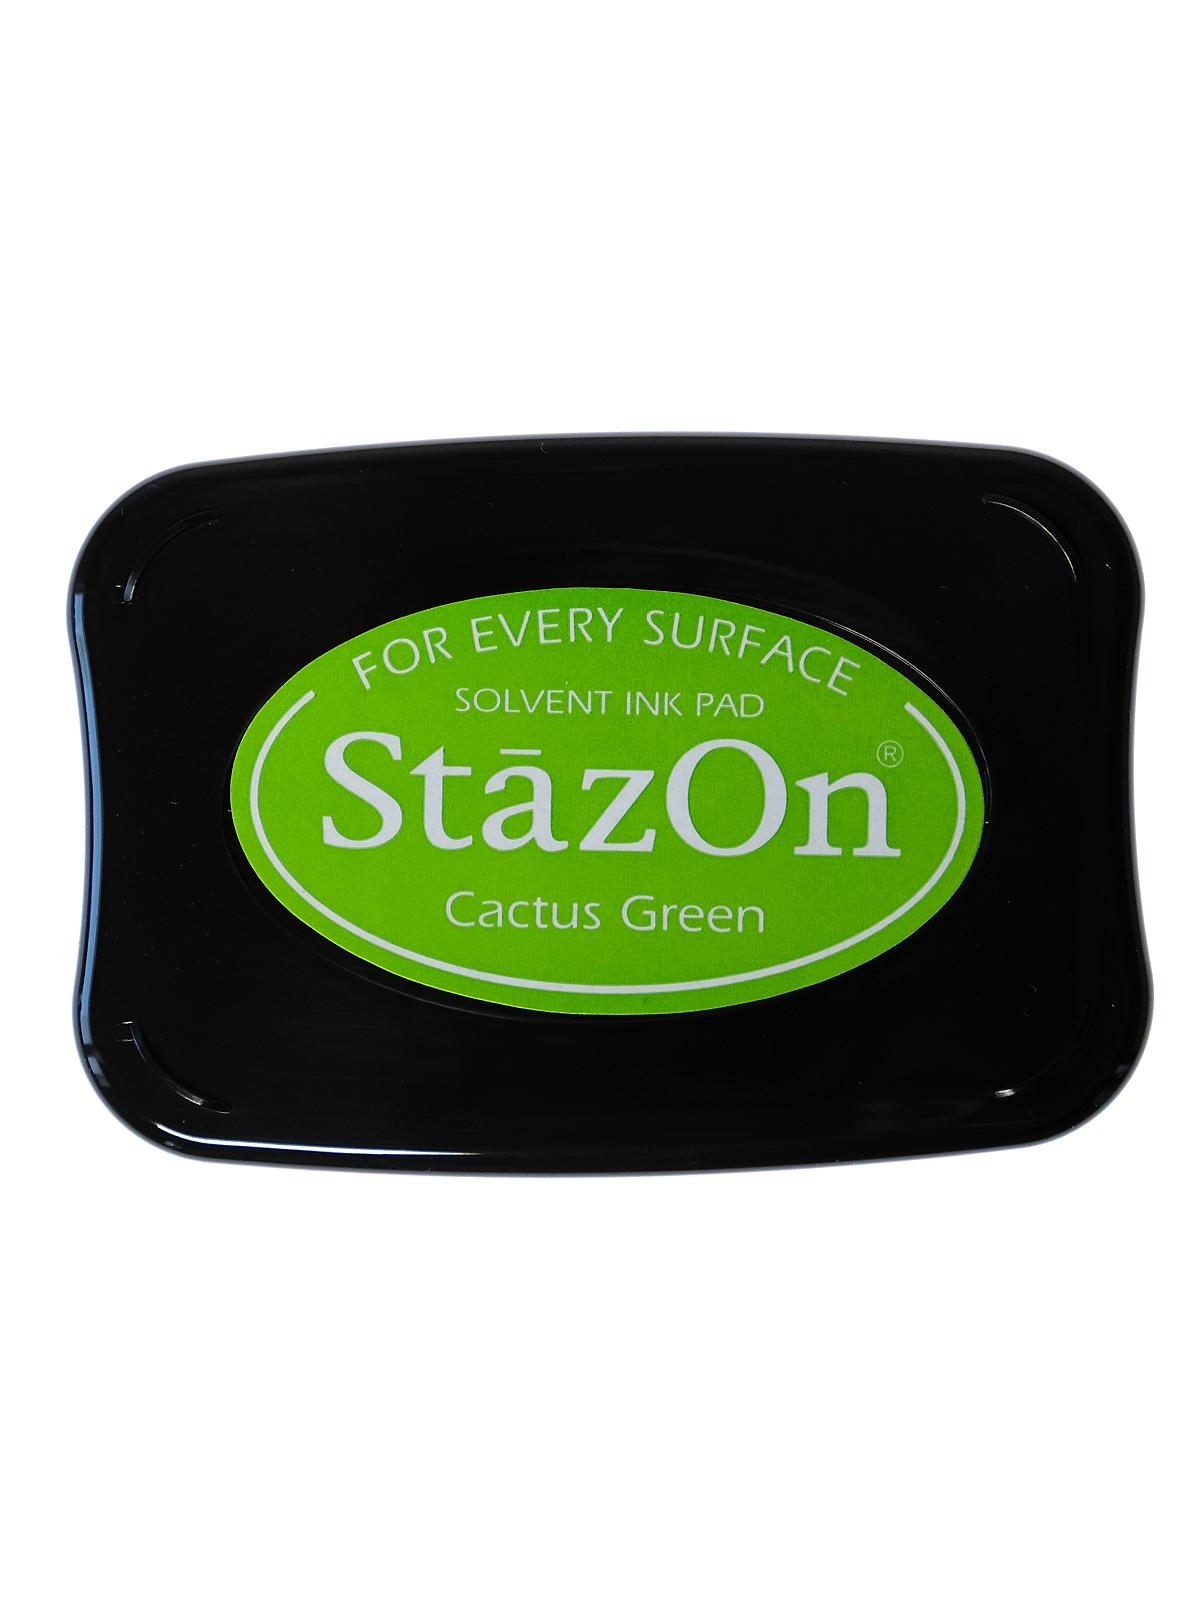 Stazon Solvent Ink Cactus Green 3.75 In. X 2.625 In. Full-size Pad